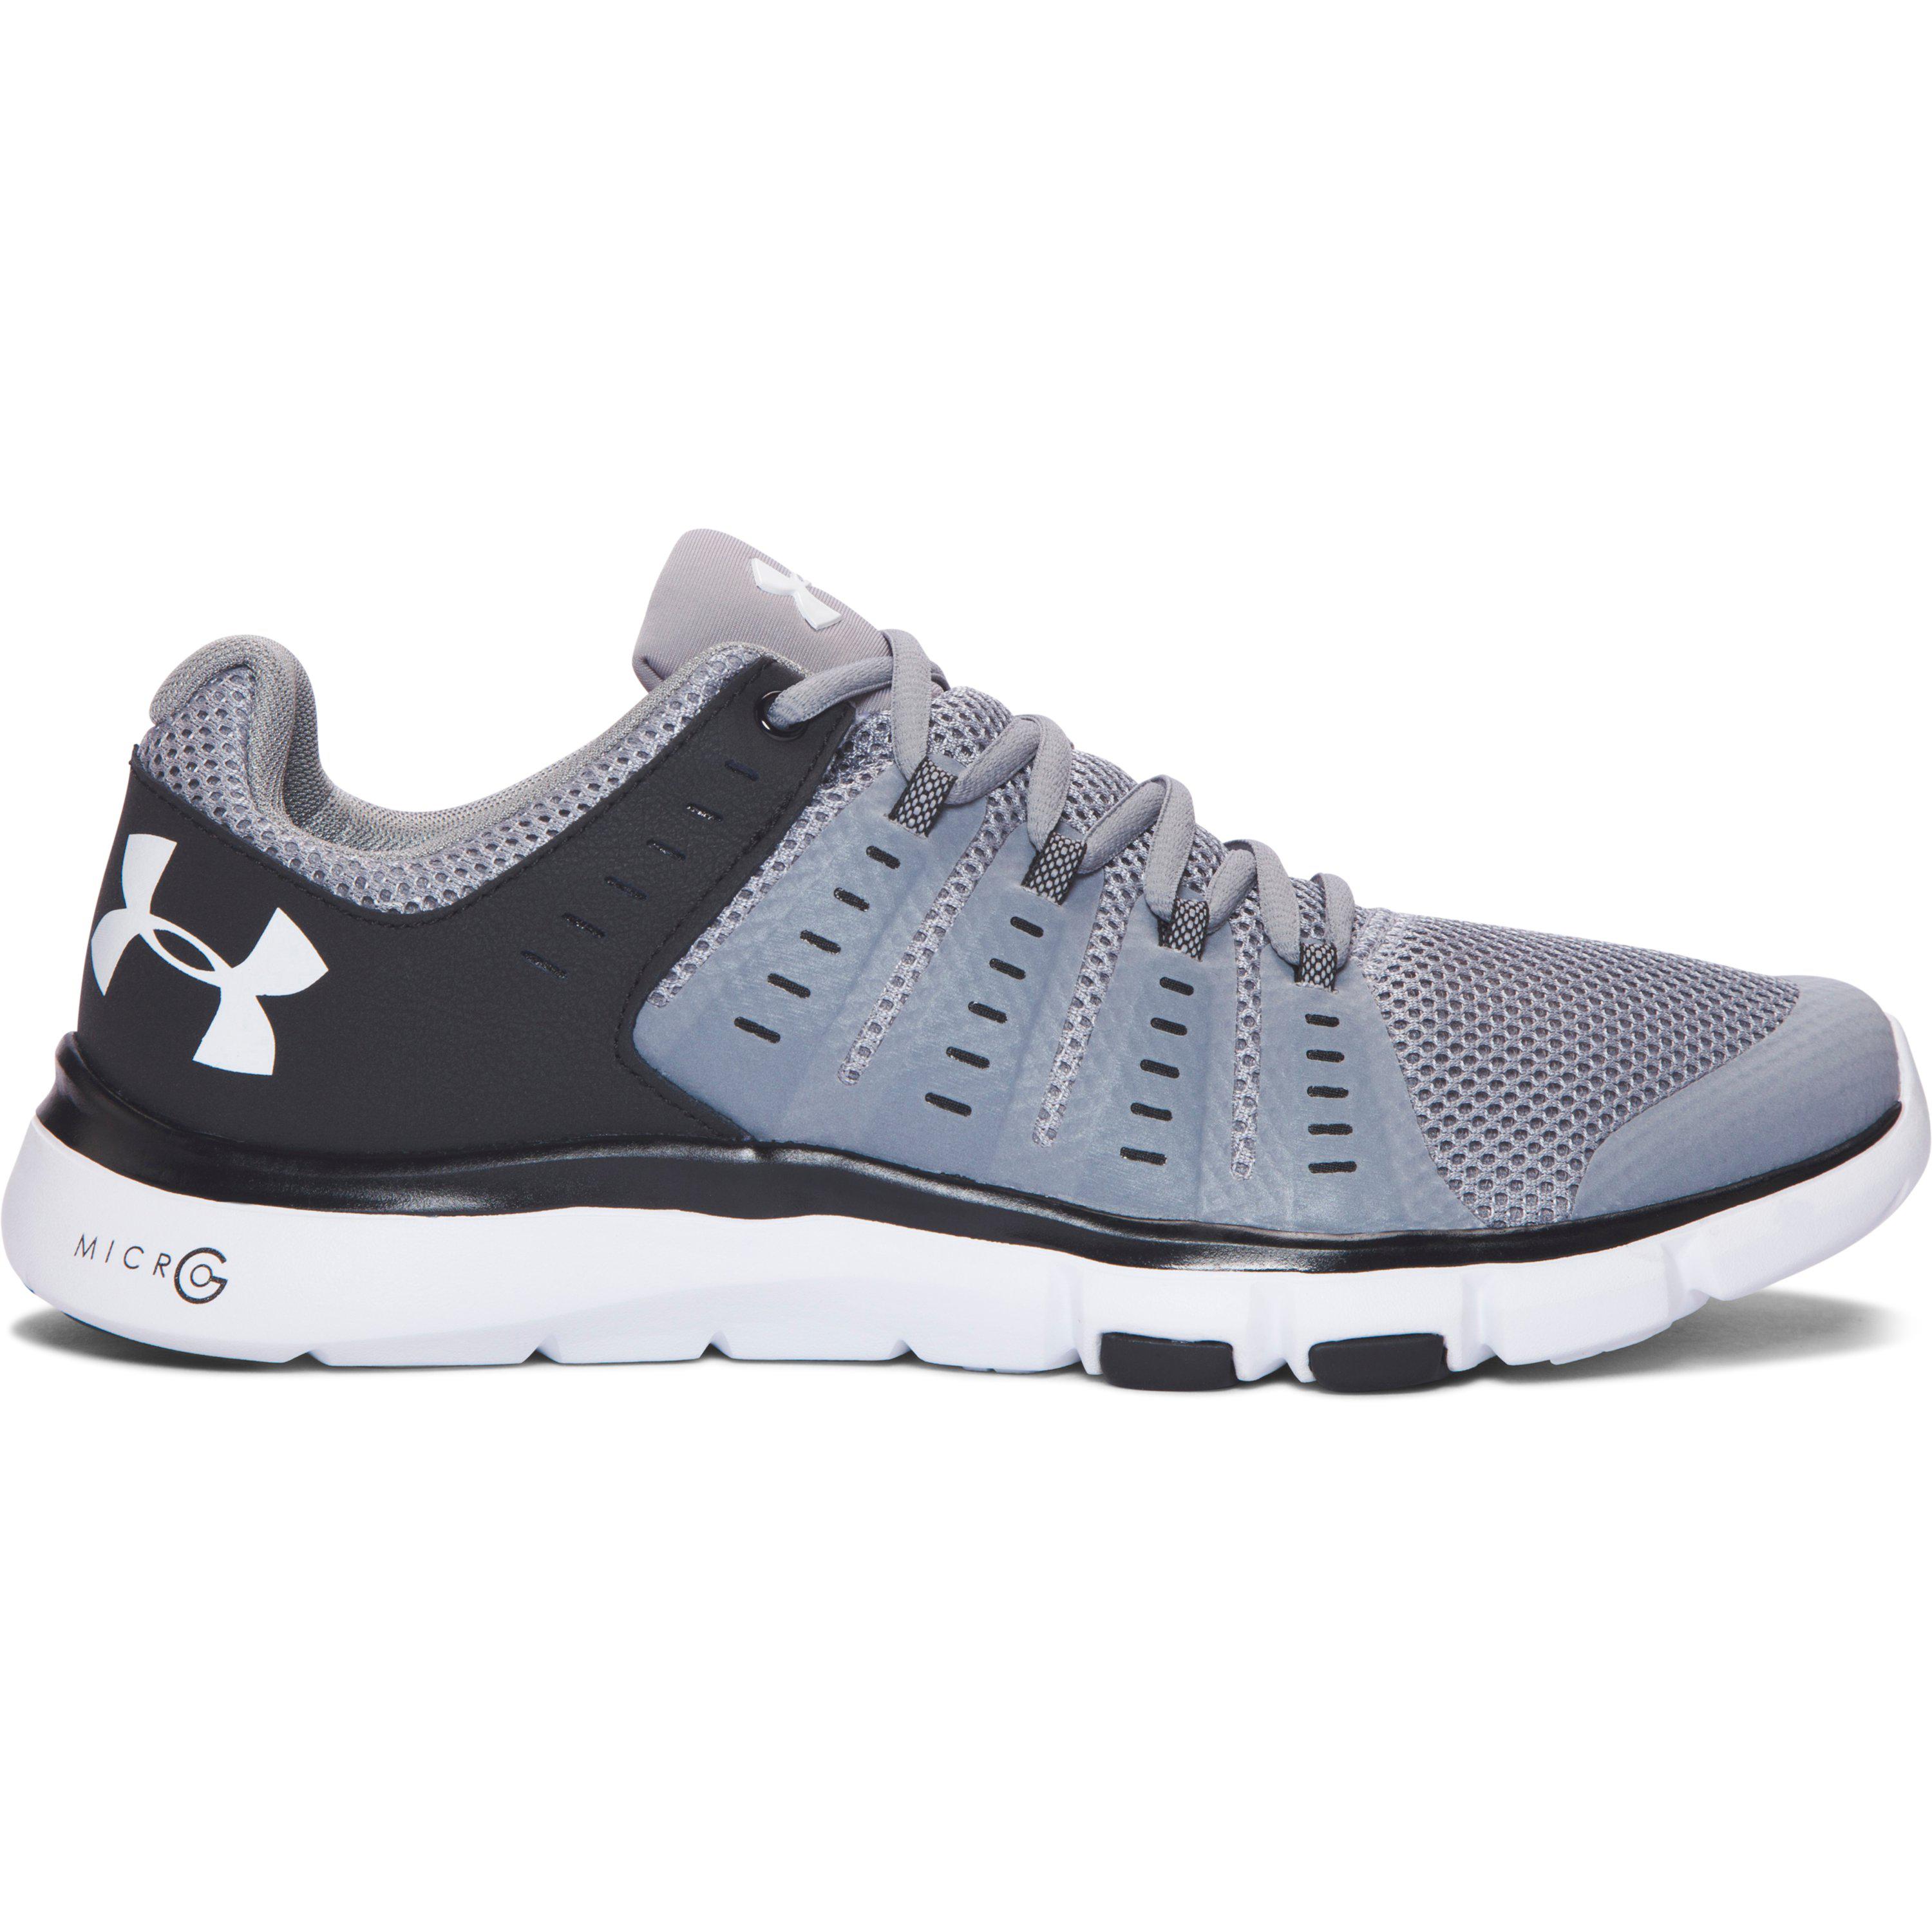 Under Armour Synthetic Men's Ua Micro G® Limitless 2 Team Training ...